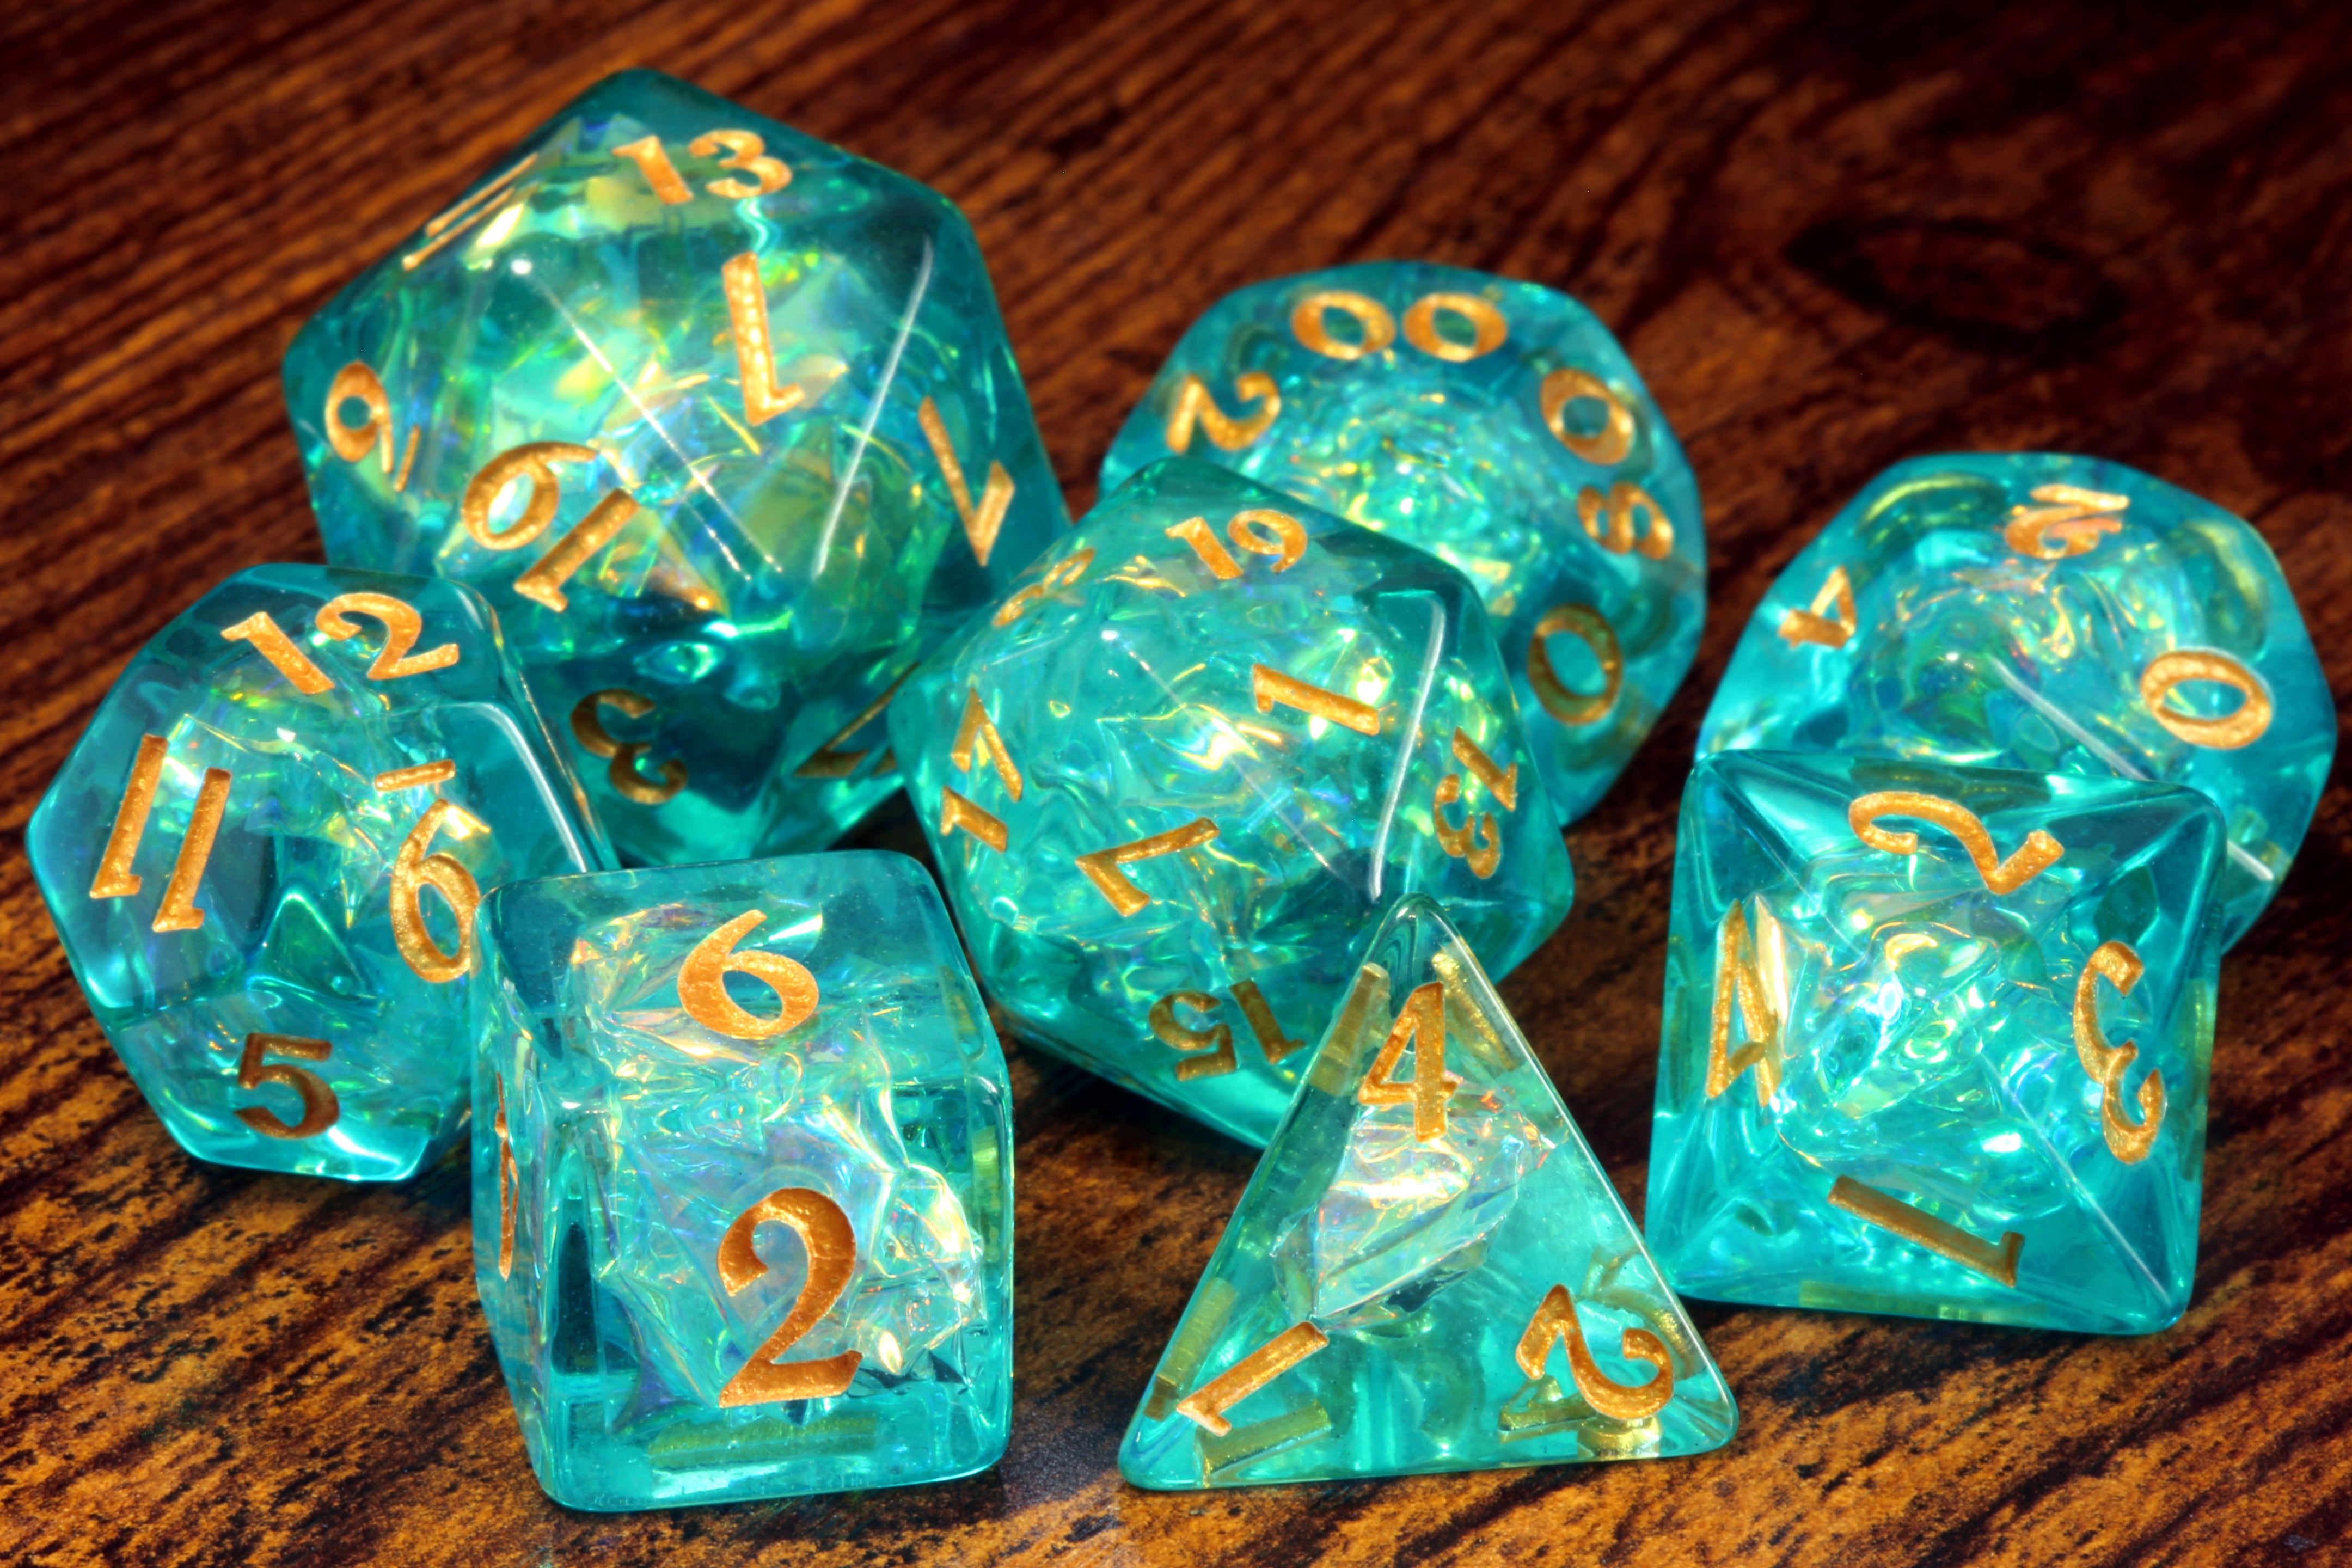 Ocean Opal 8 piece dice set - Green with Holographic inclusions - The Wizard's Vault